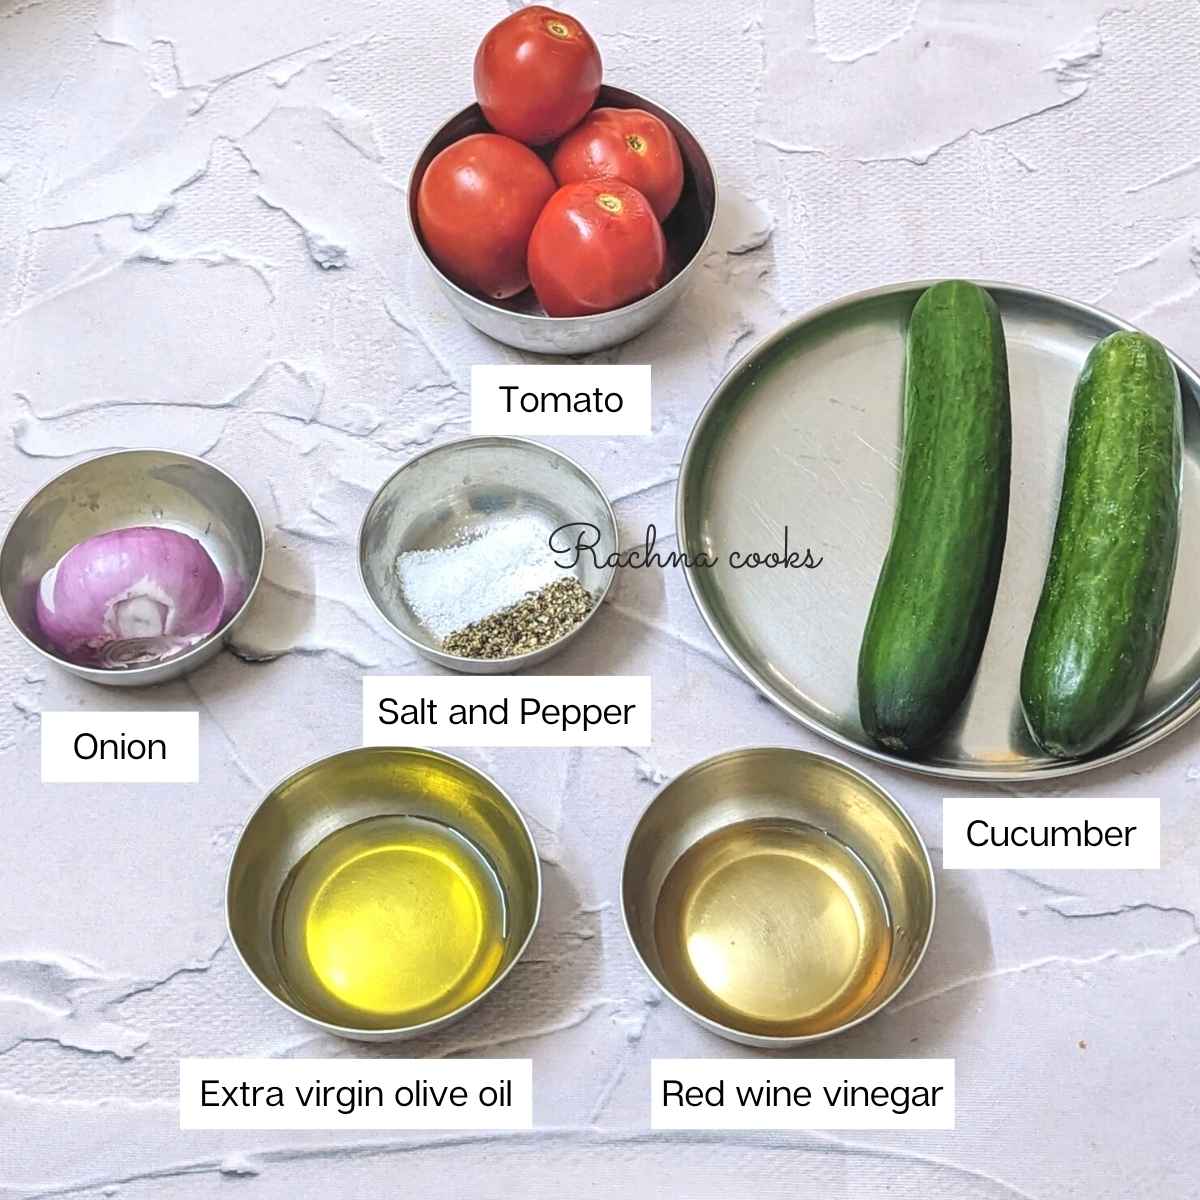 Ingredients for making Mediterranean cucumber tomato salad. Cucumbers, tomatoes, onion, extra virgin olive oil, red wine vinegar, salt and pepper